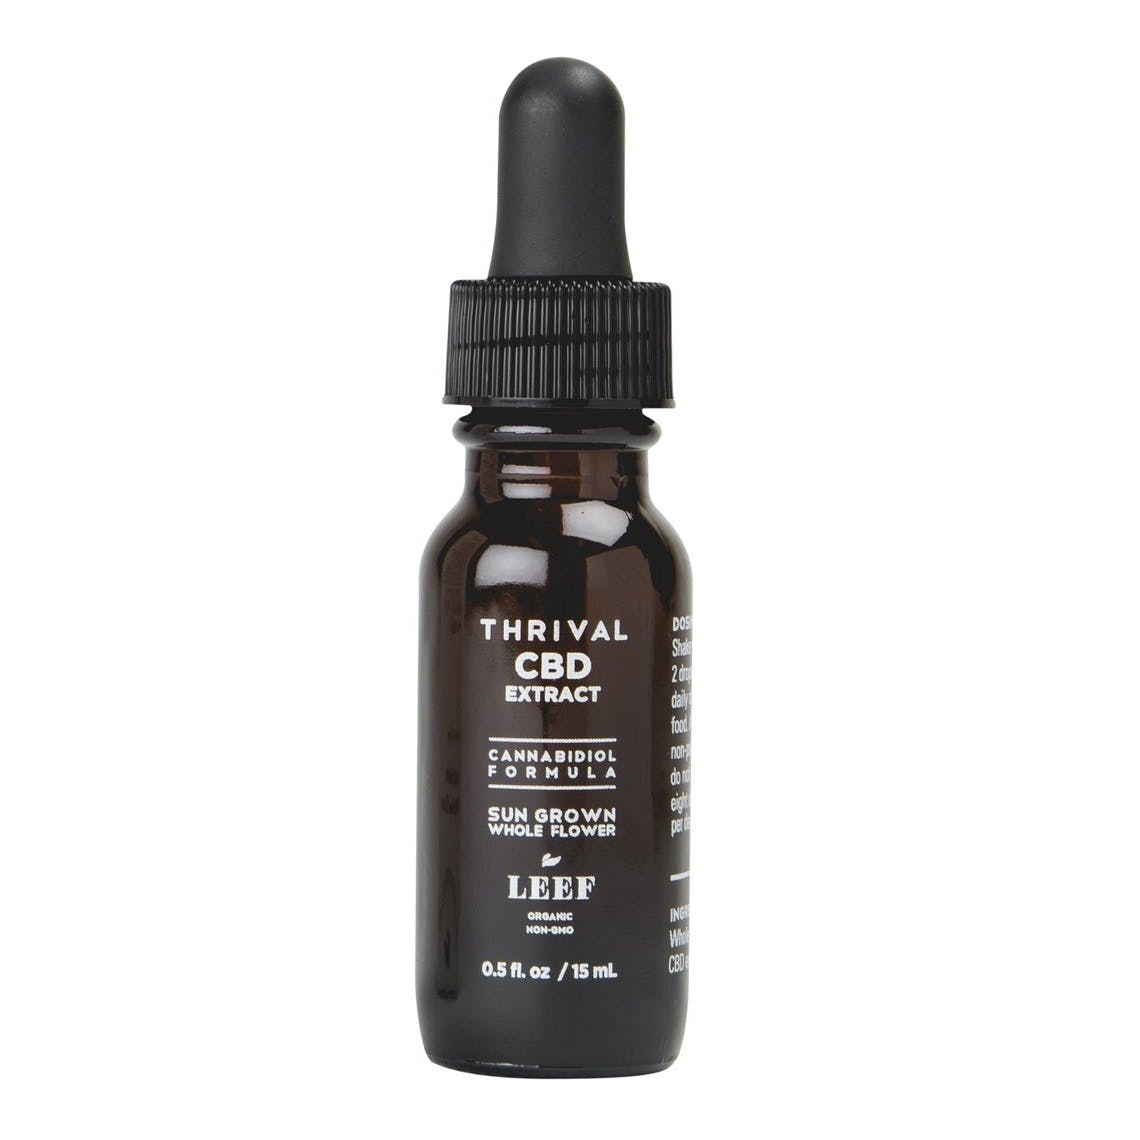 Thrival CBD Extract by Leef